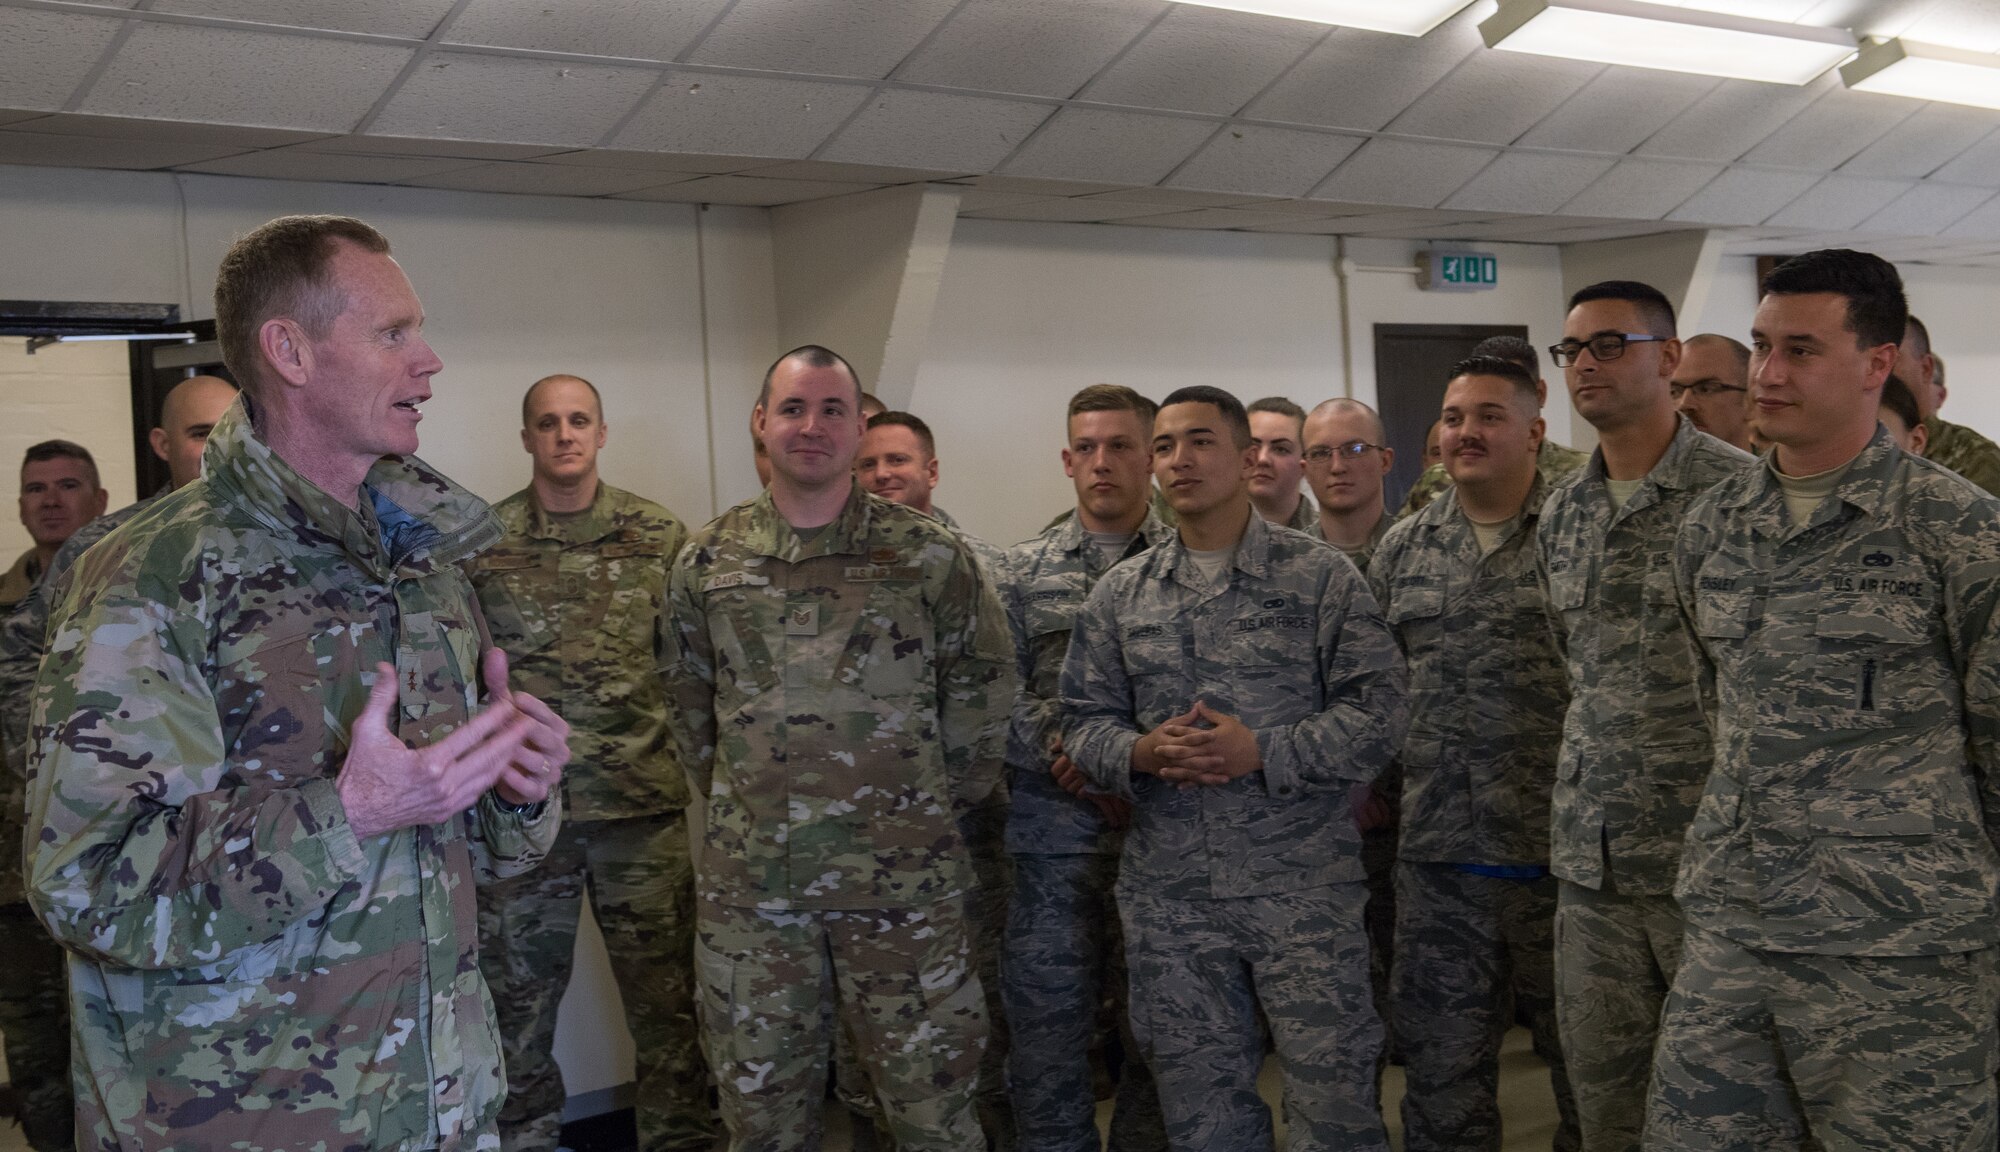 Maj. Gen. James Dawkins Jr., Eighth Air Force commander and Joint-Global Strike Operations Center commander, speaks with Airmen of the Bomber Task Force maintenance team at RAF Fairford, England, April 4, 2019. Dawkins visited more than 10 different facilities on base speaking with Airmen and getting a first-hand look at what Fairford has to offer. (U.S. Air Force photo by Airman 1st Class Tessa B. Corrick)